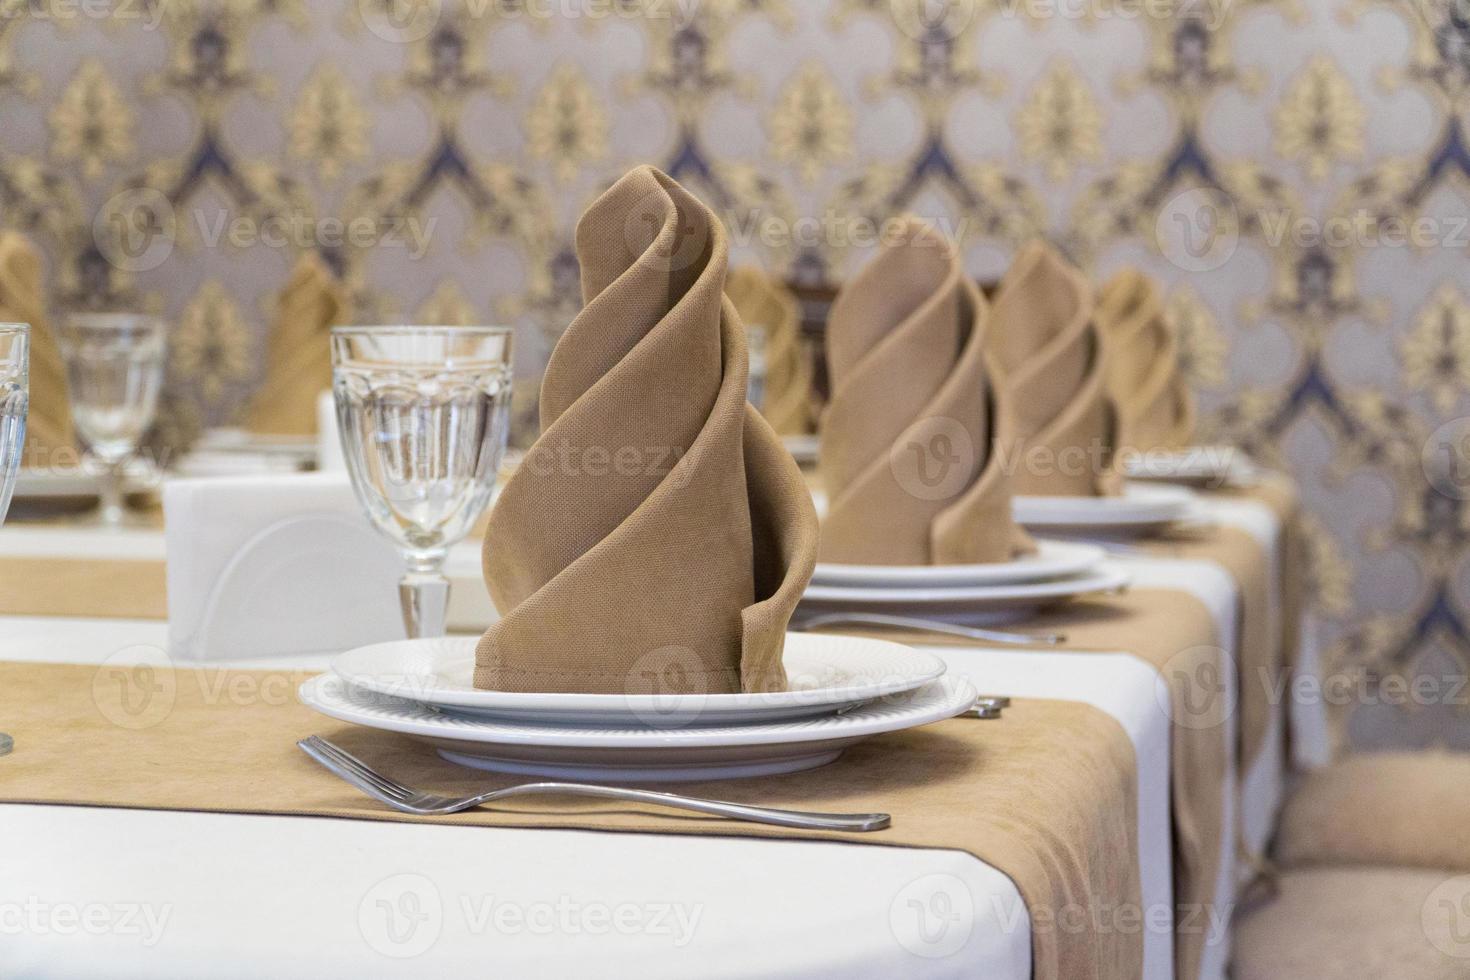 serving banquet table in a luxurious restaurant in beige and white style photo